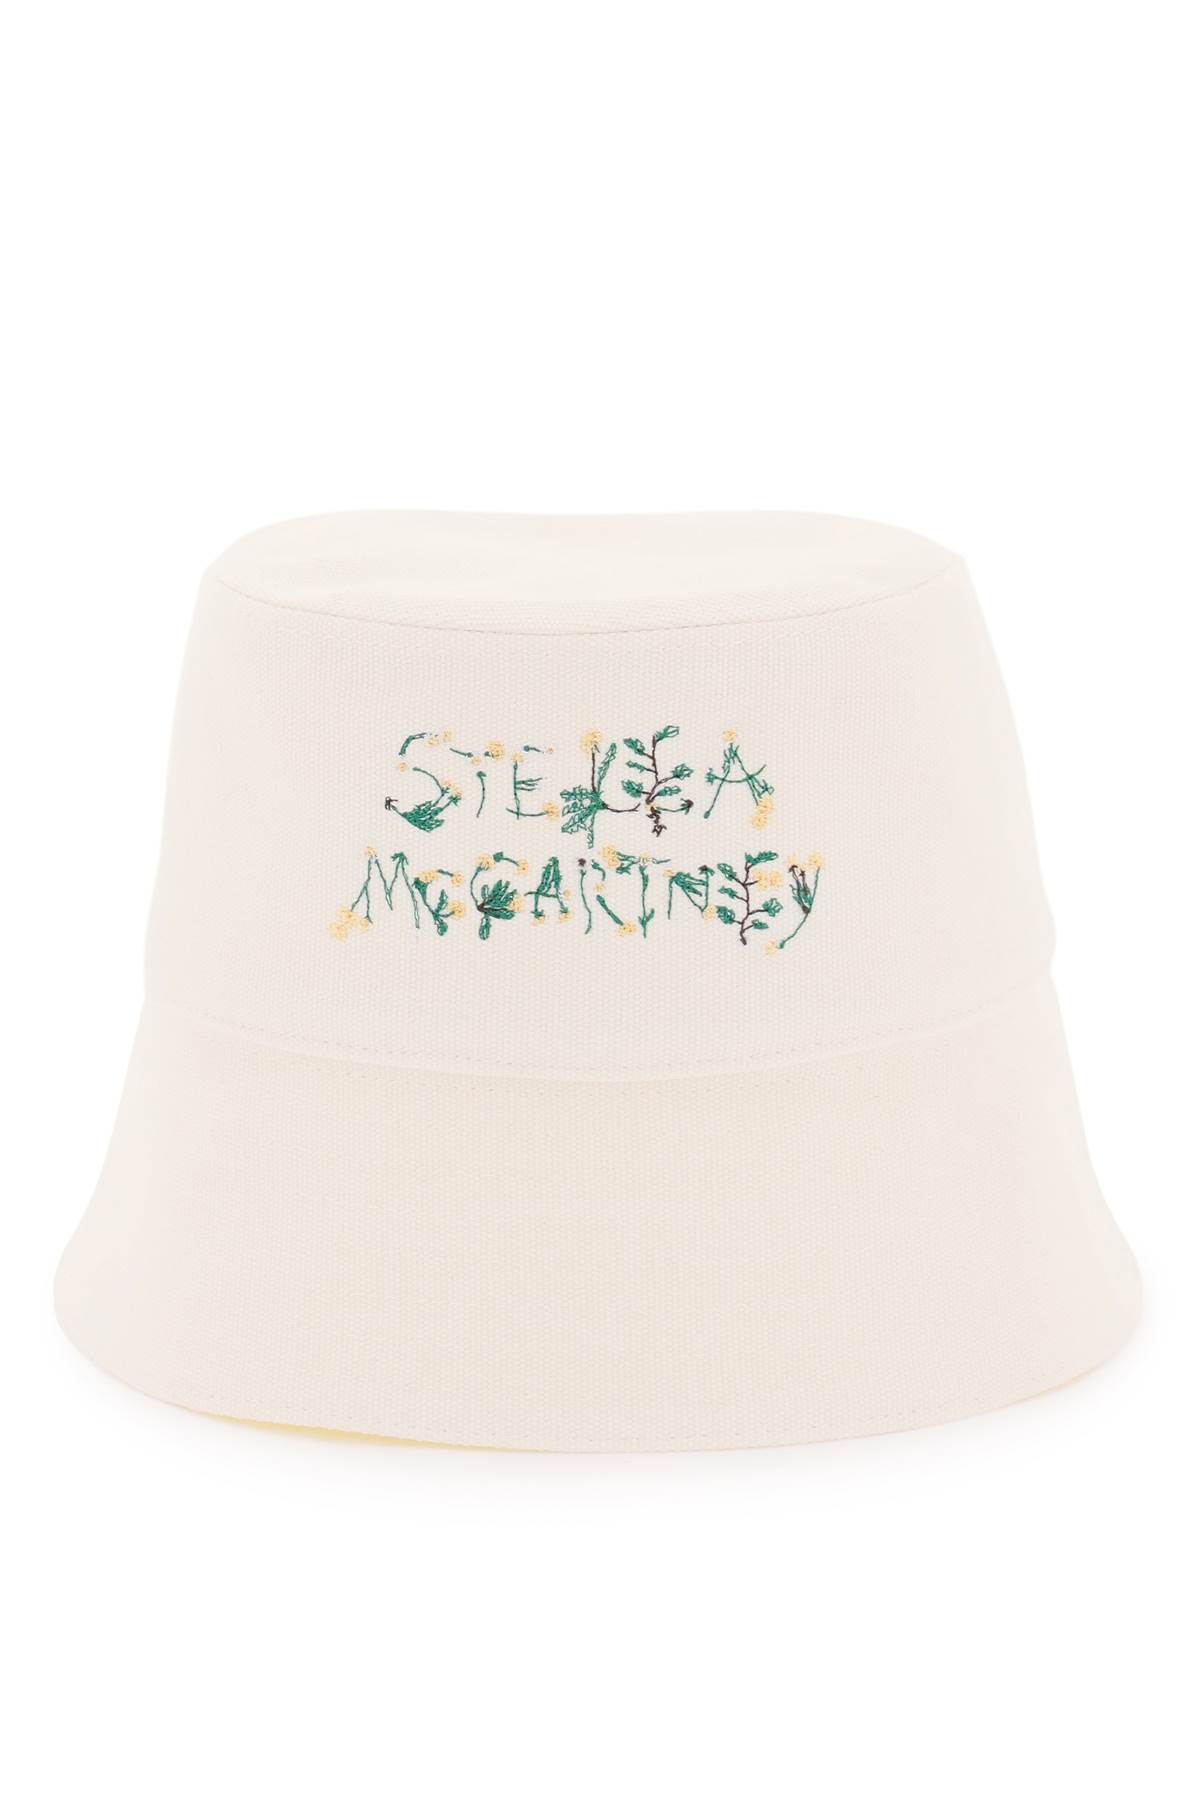 STELLA MCCARTNEY BUCKET HAT WITH FLORAL LOGO EMBROIDERY